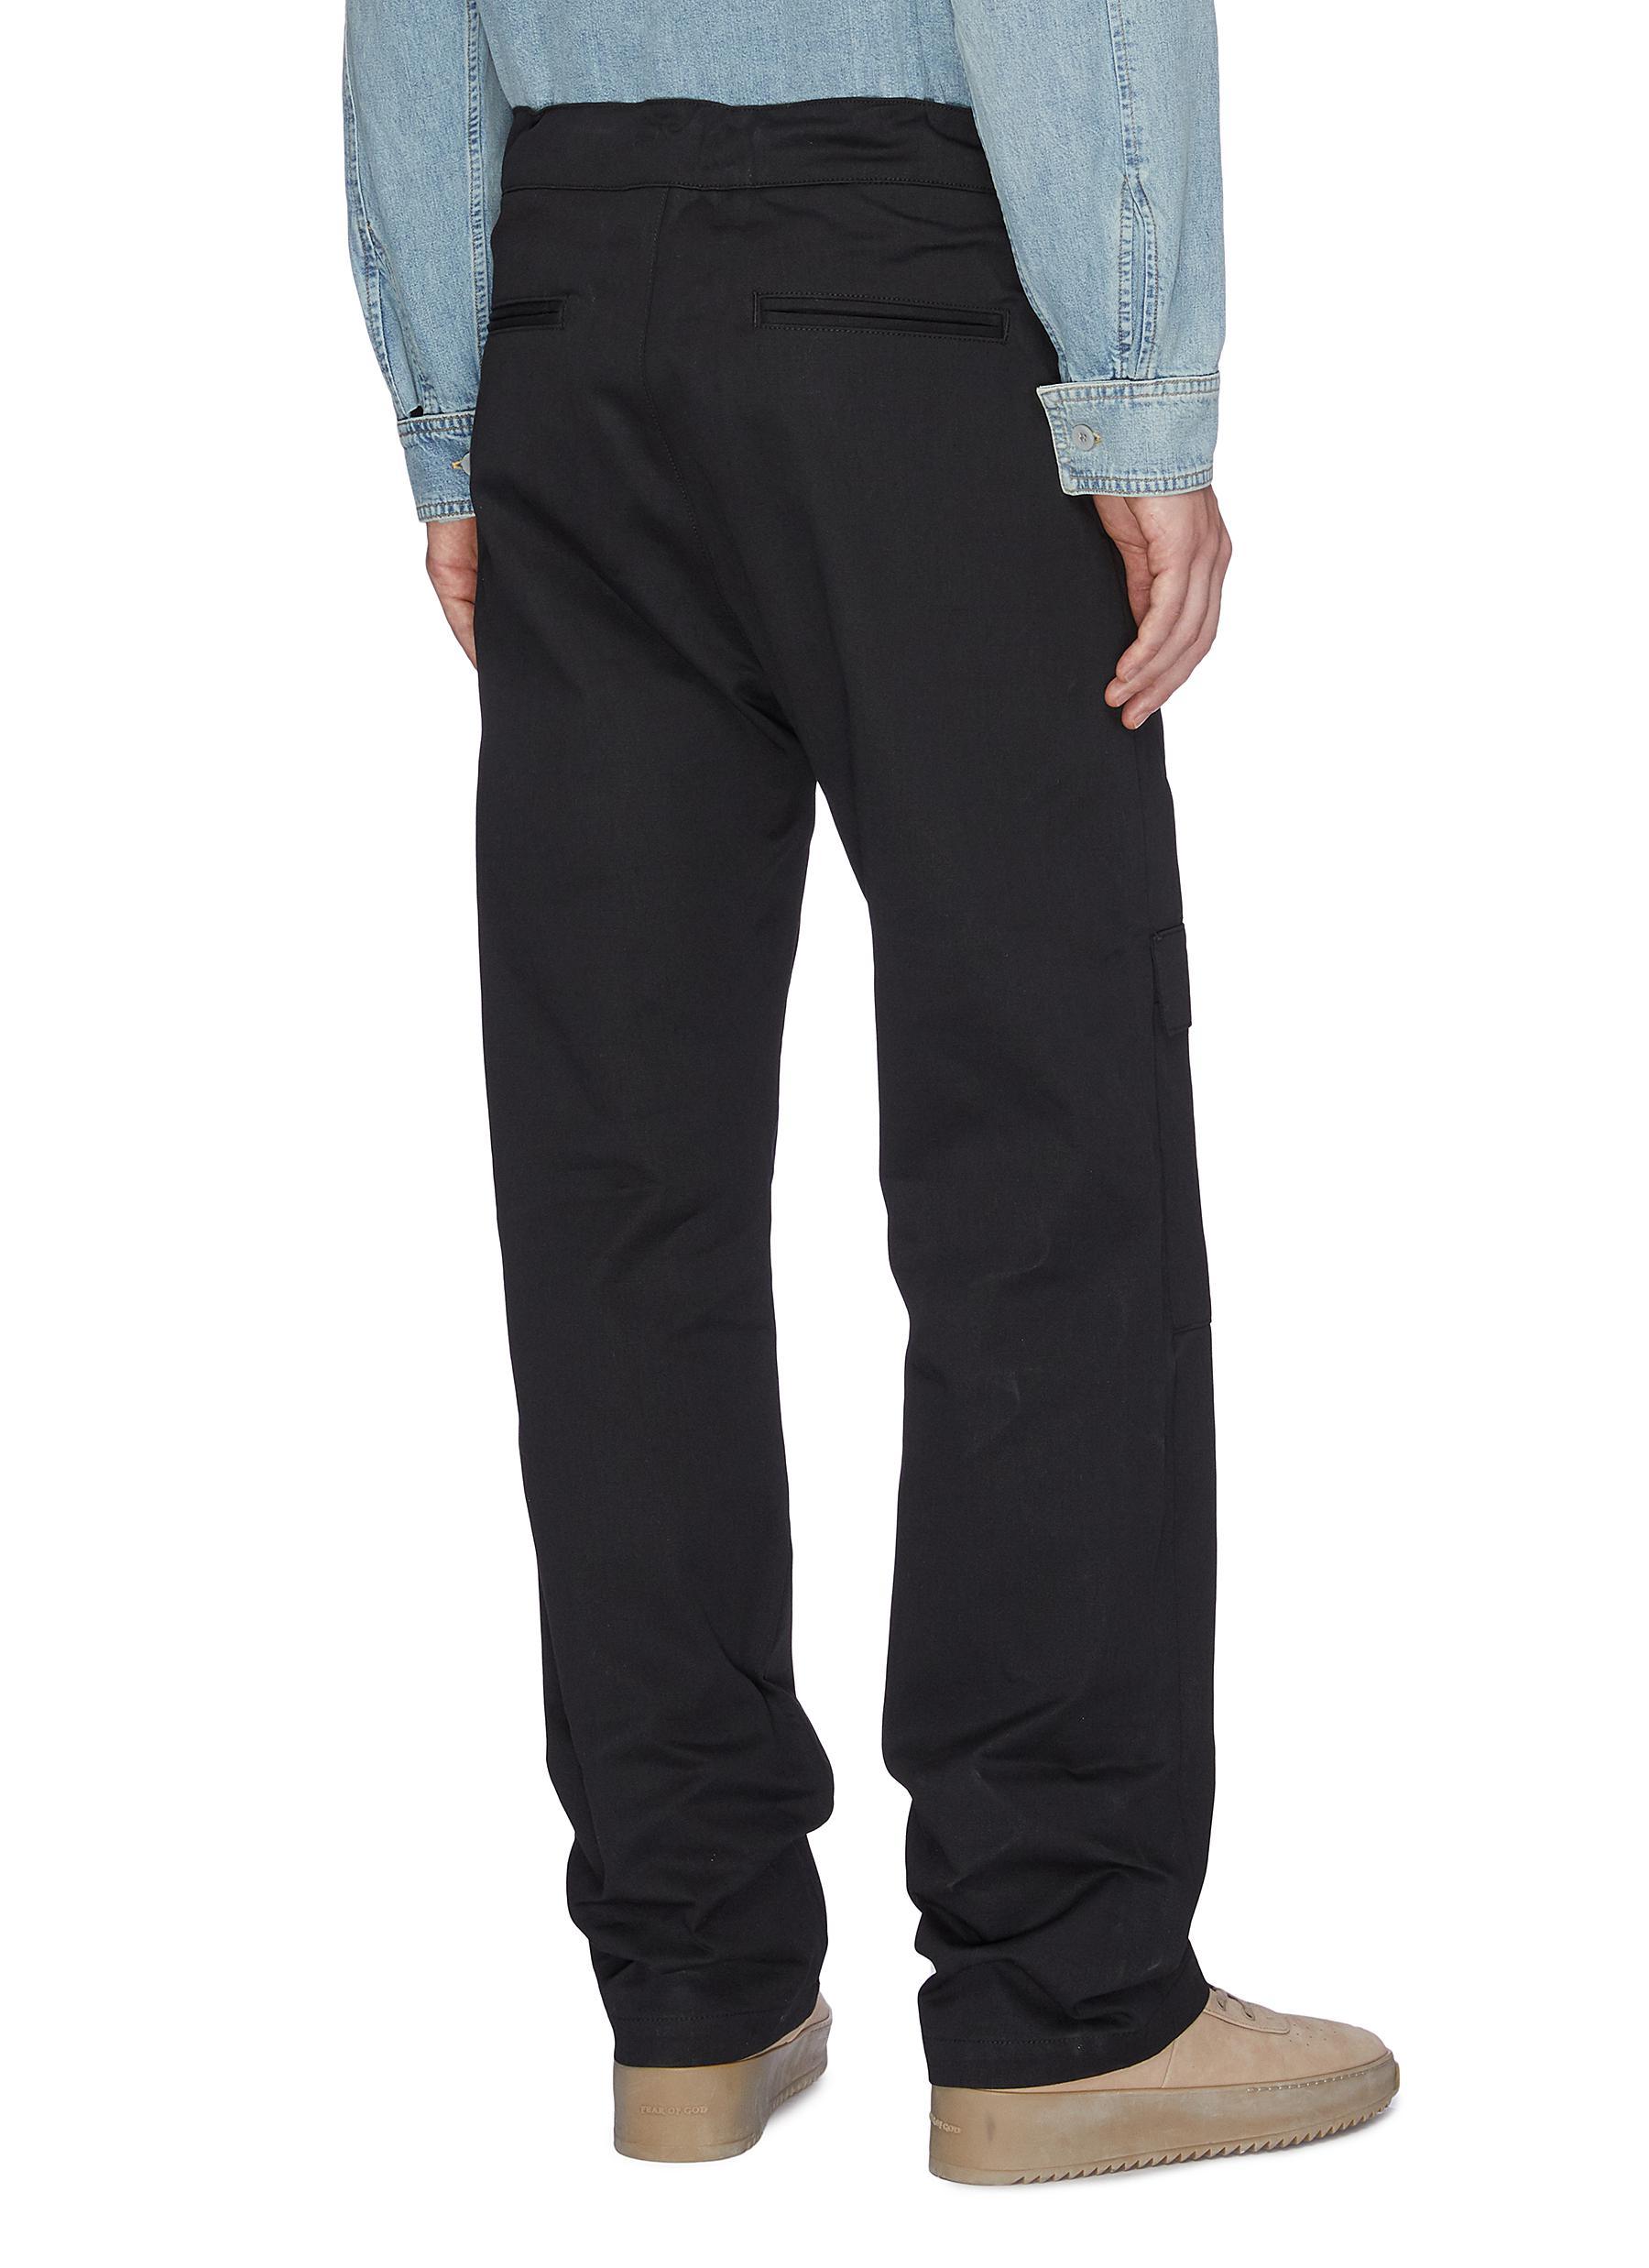 Fear Of God Cotton Pleated Cargo jogging Pants in Black for Men - Lyst